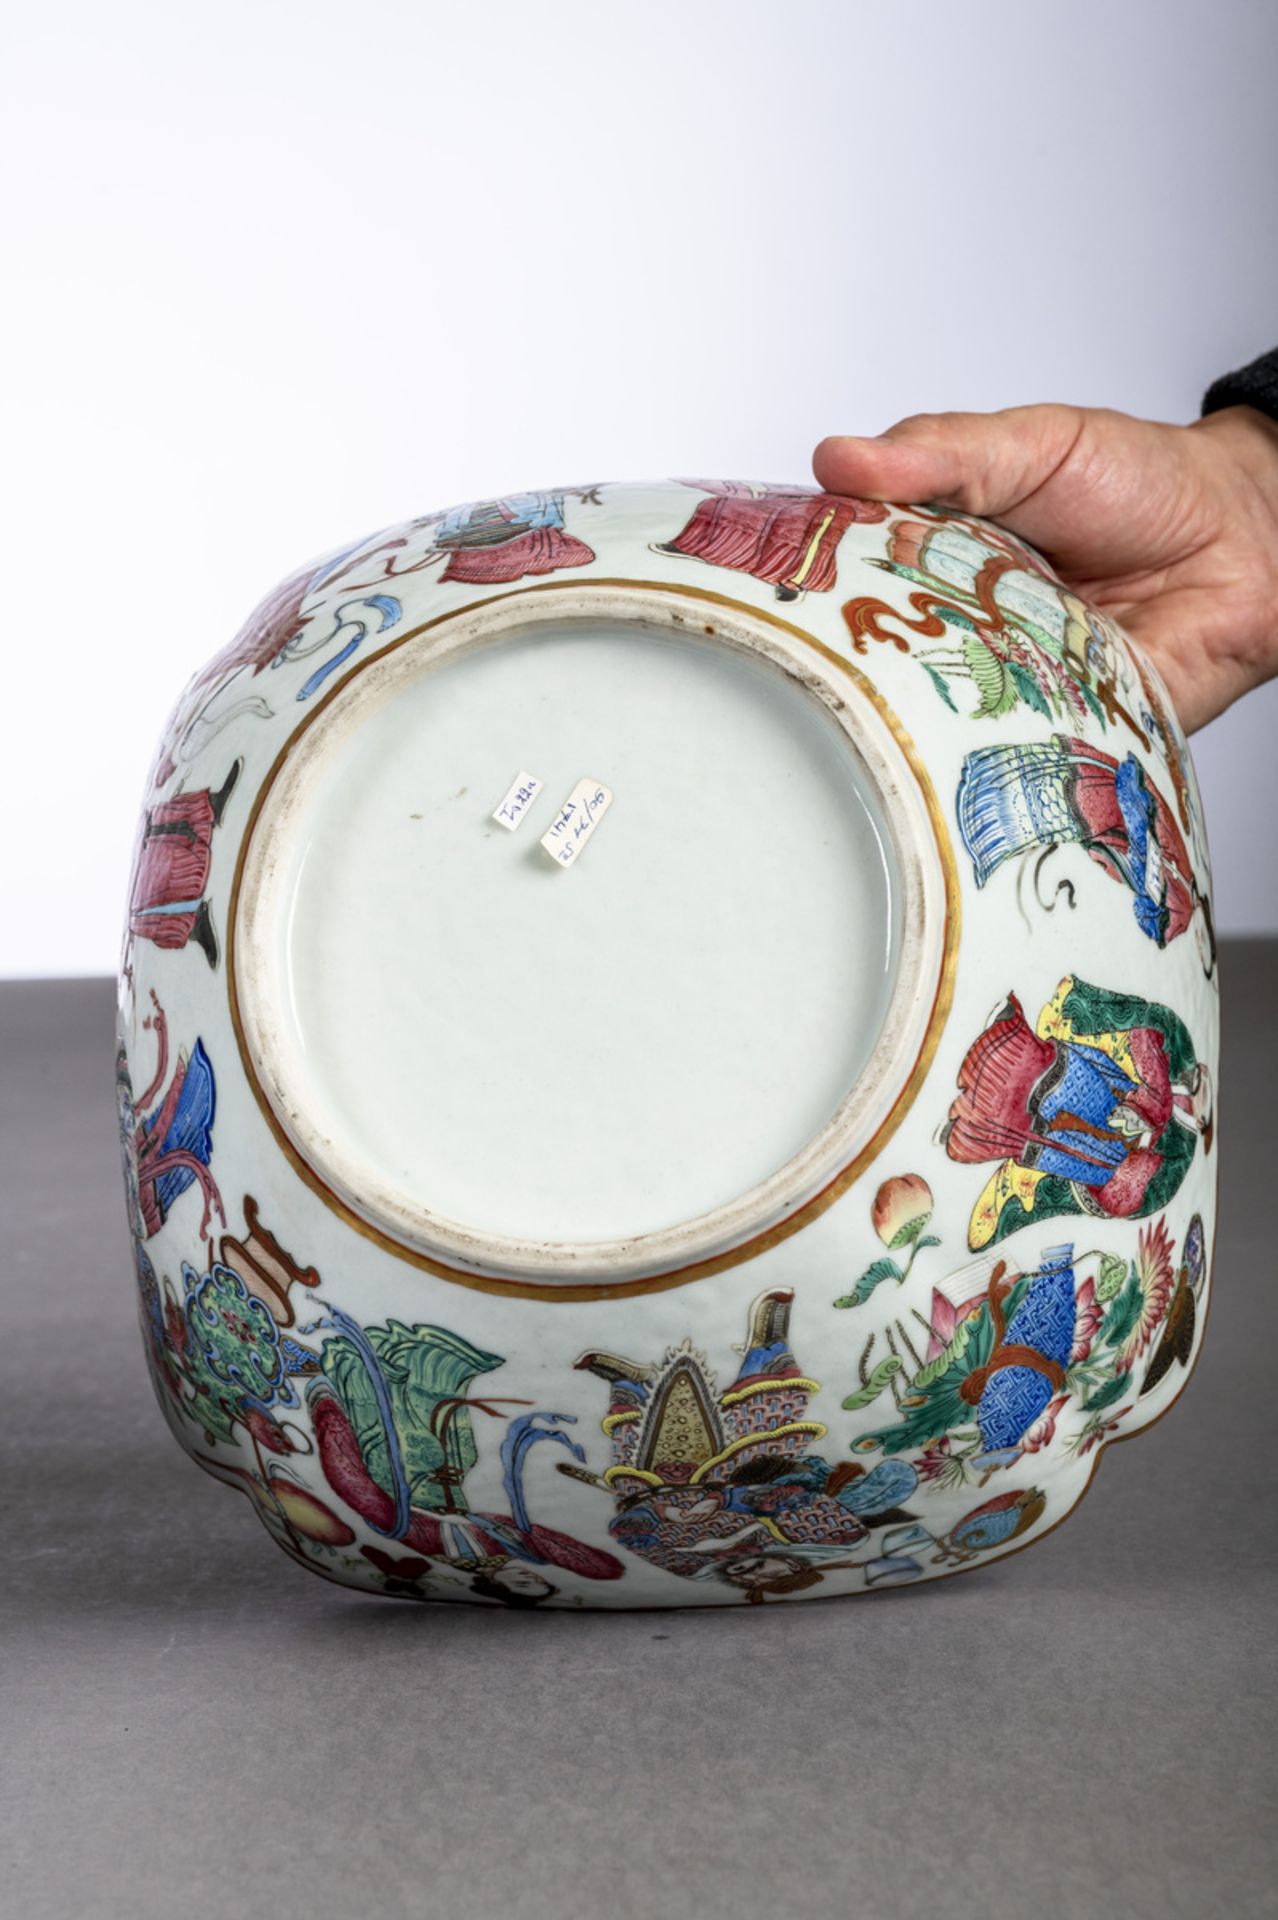 Lobed bowl in Chinese famille rose porcelain with gold rims 'characters', 19th century (11x24x24cm) - Image 4 of 5